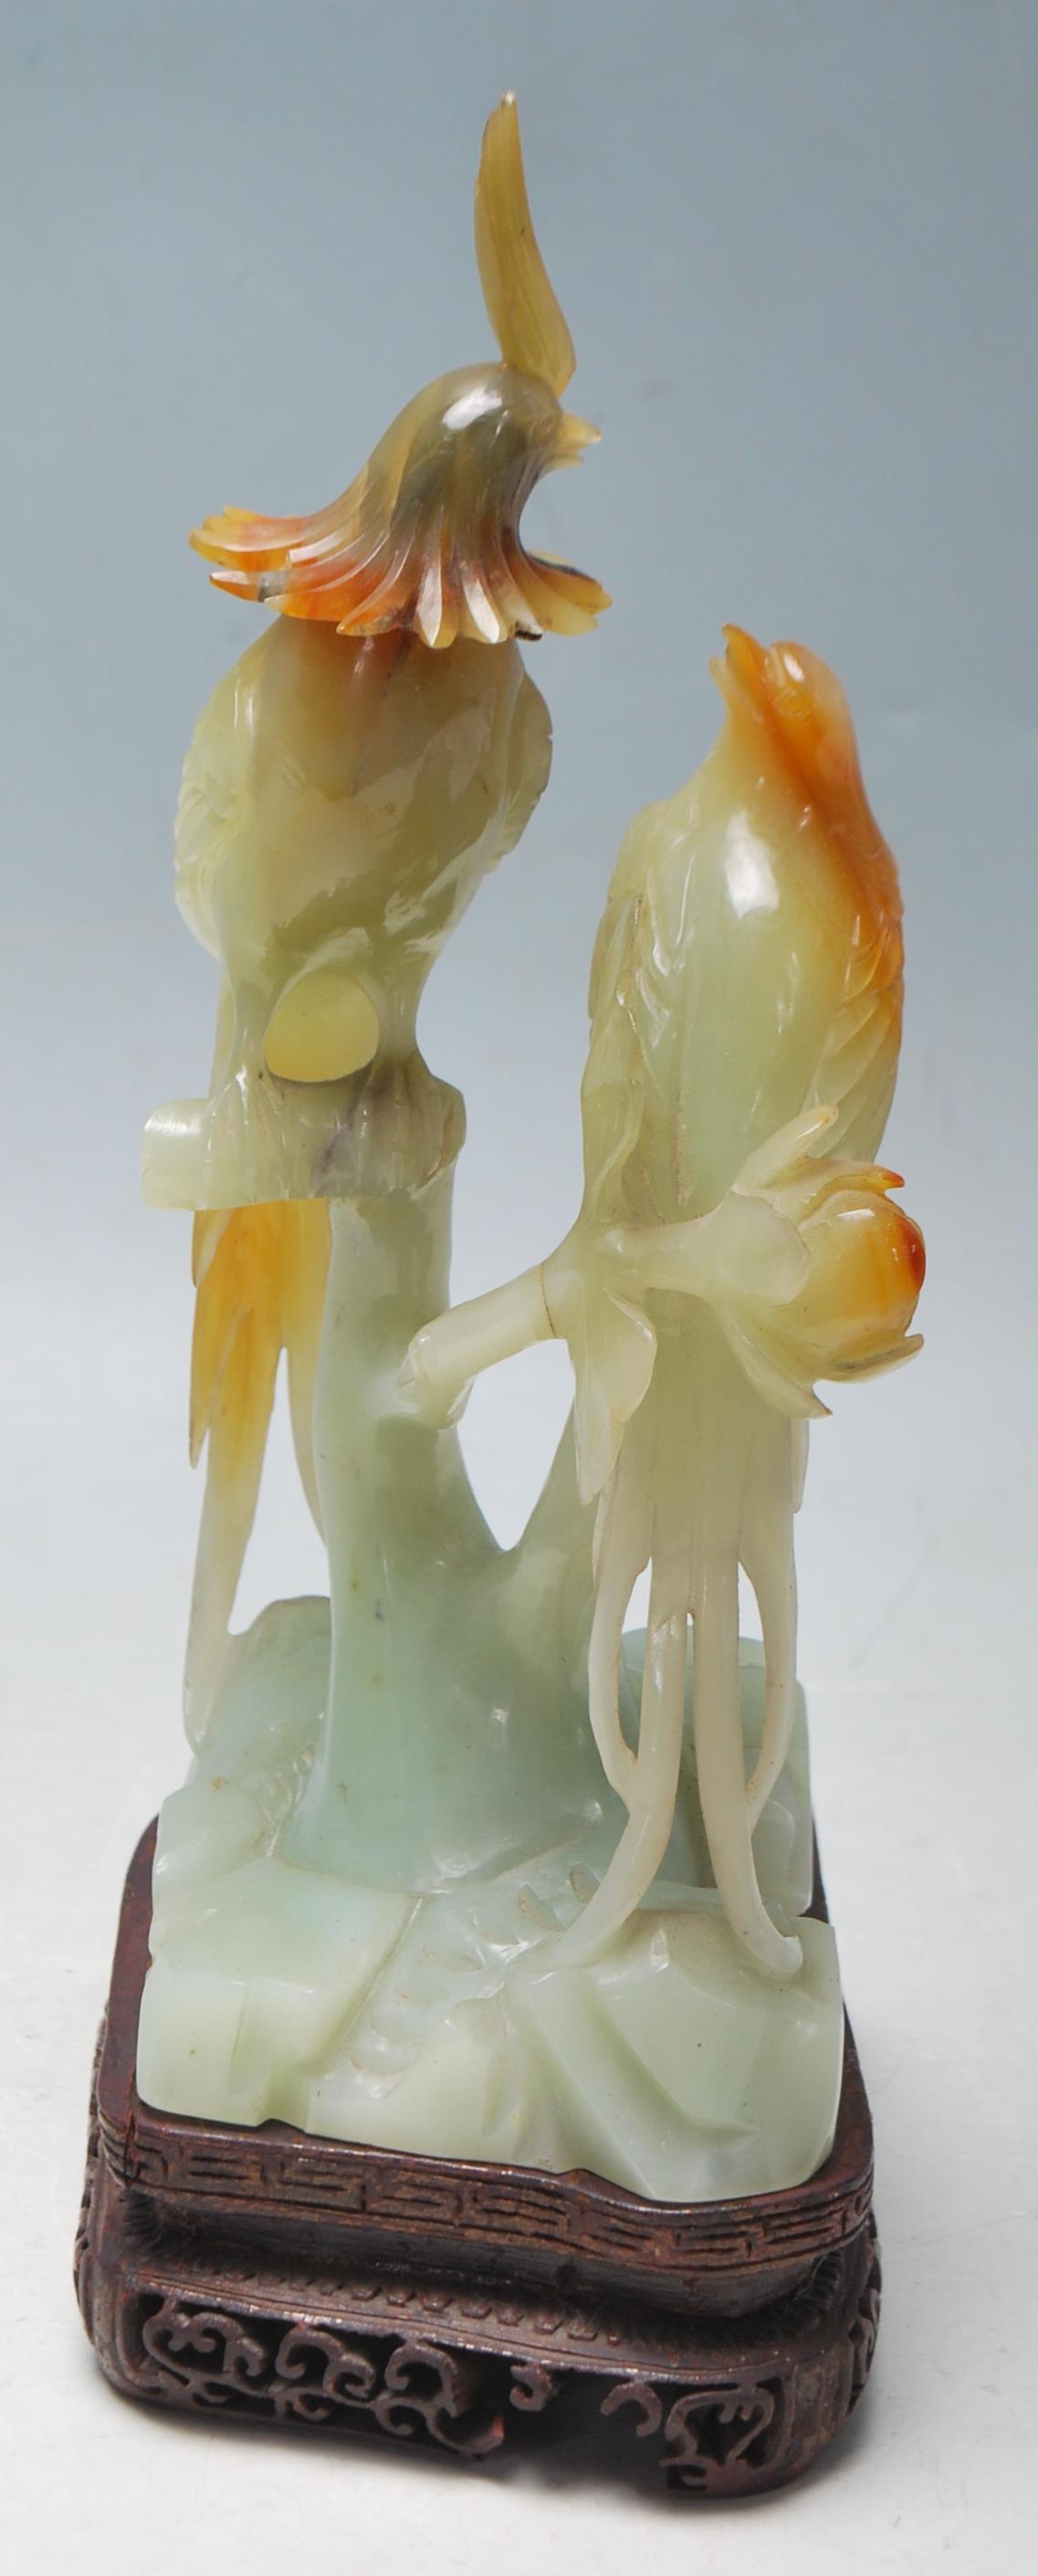 CHNESE CARVED JADE PERCHED BIRD FIGURINE - Image 2 of 7